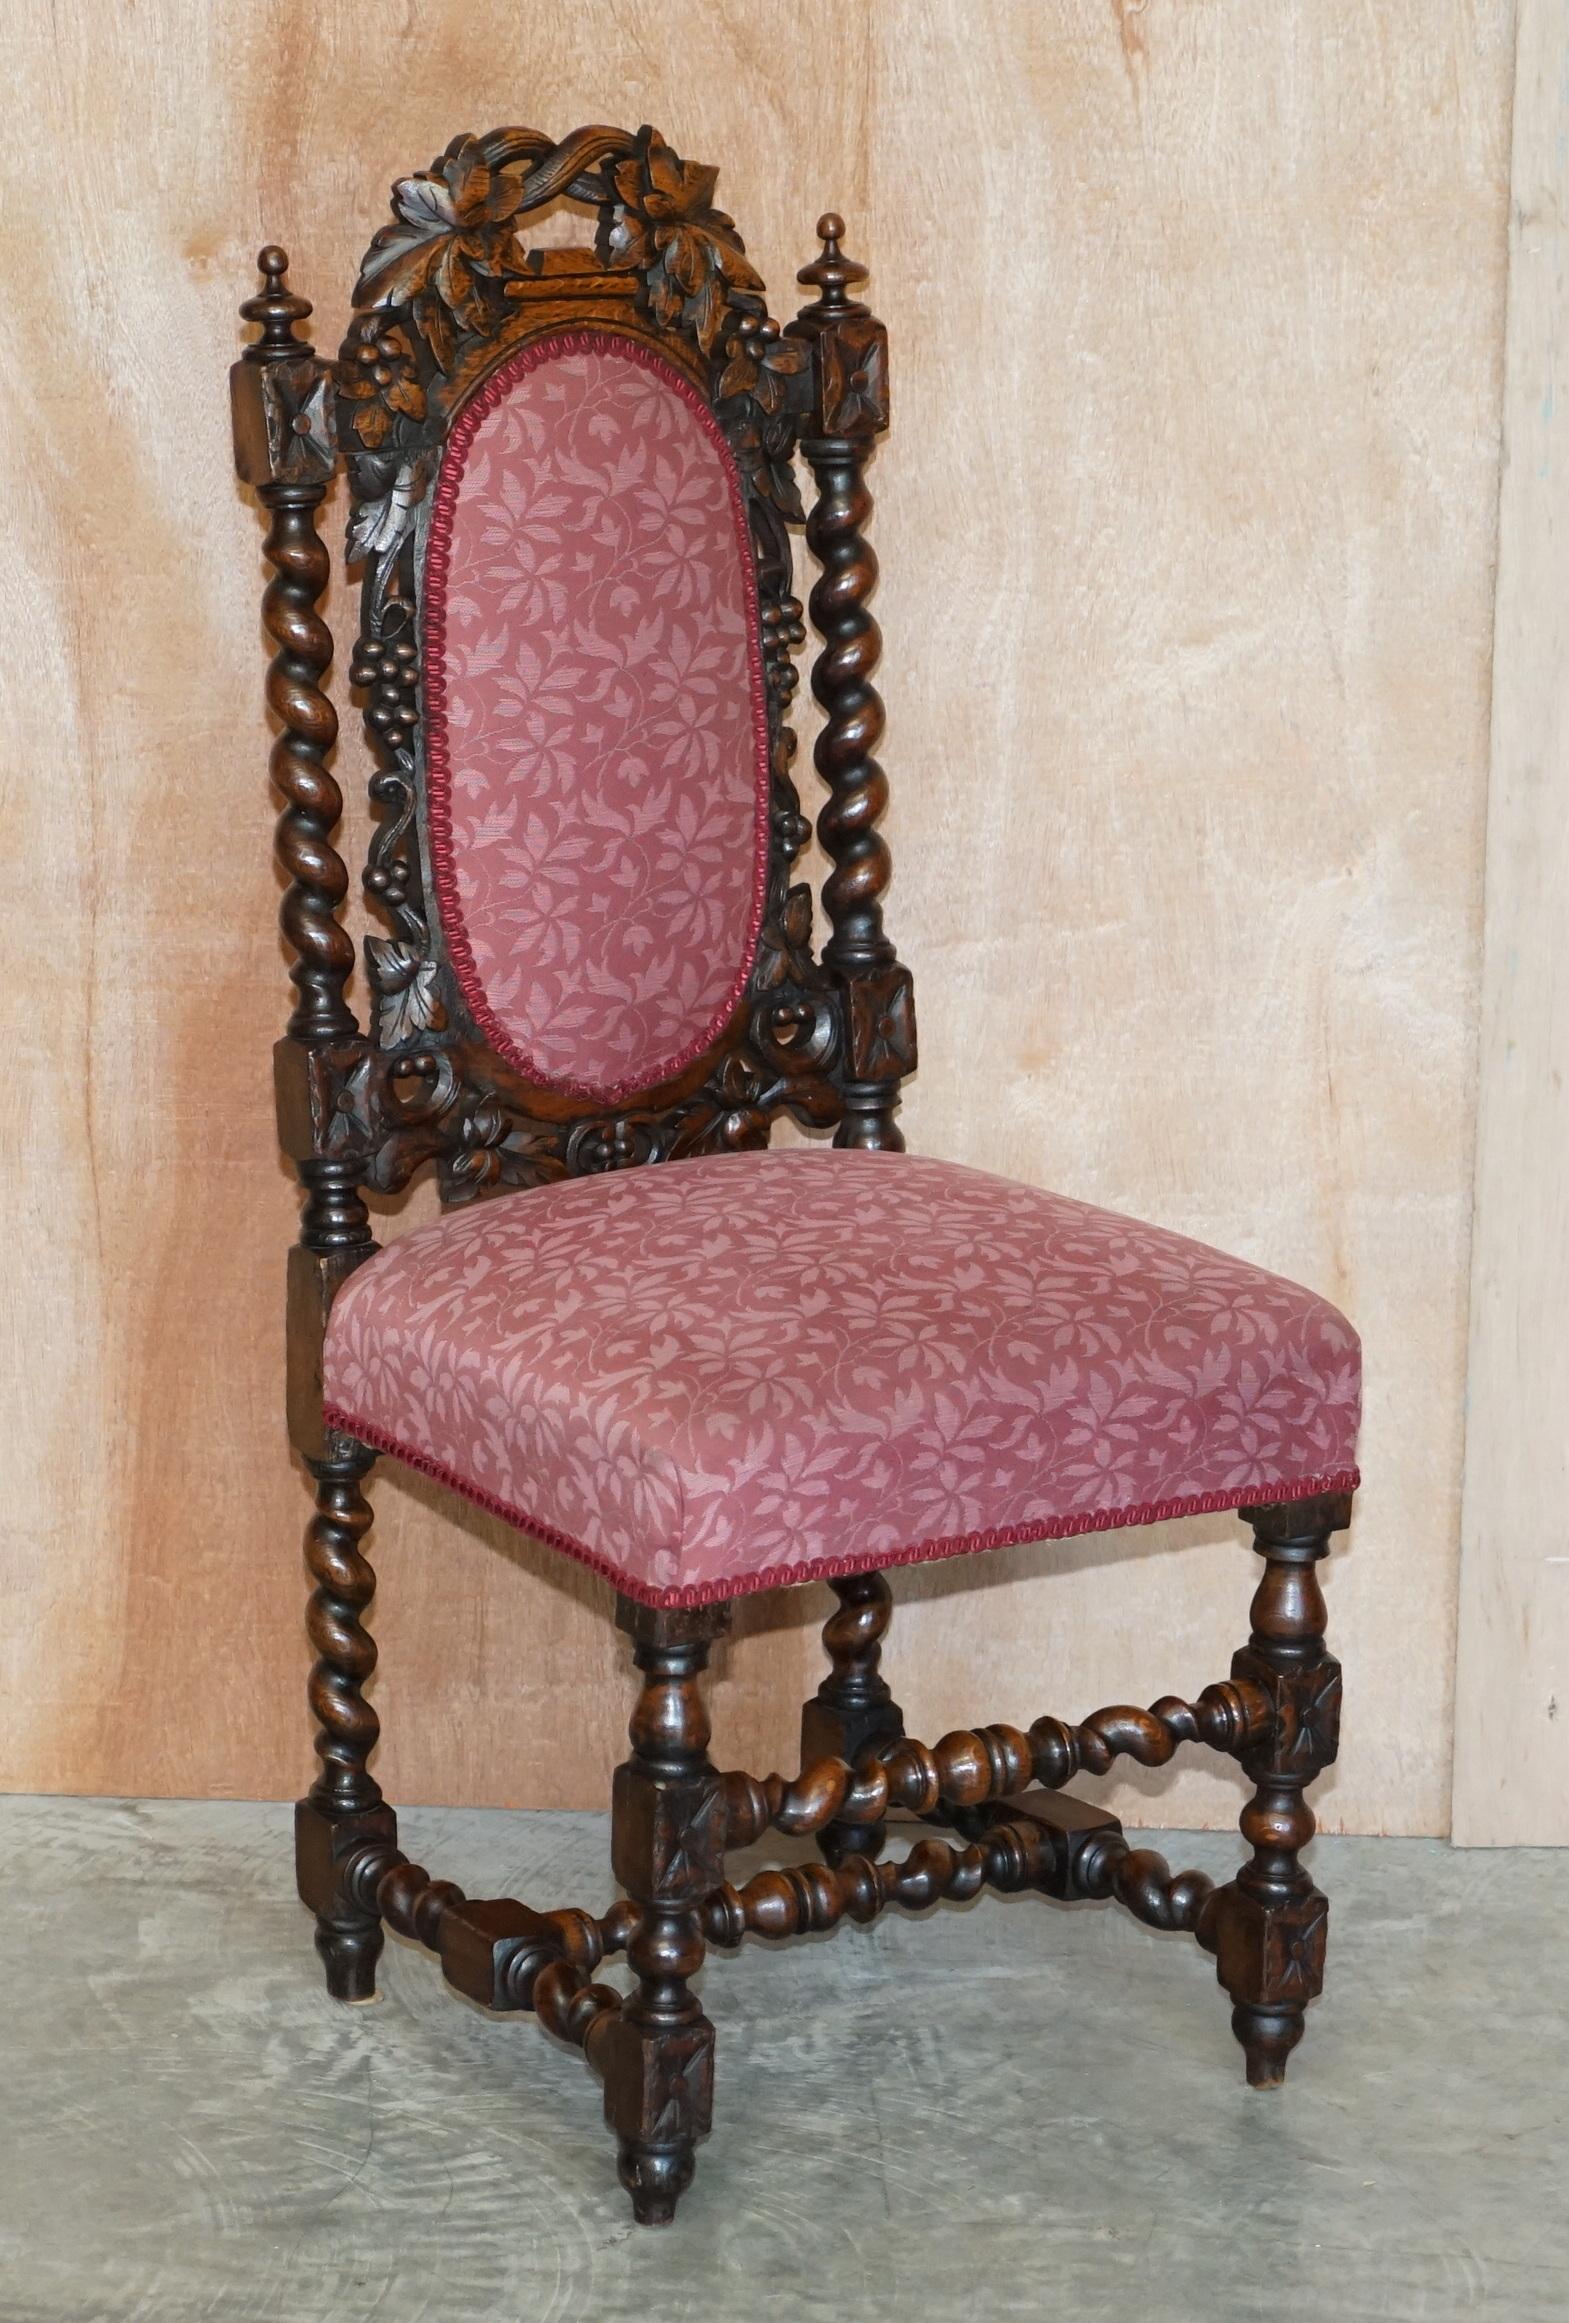 We are delighted to offer for sale this lovely suite of six Antique Victorian circa 1860-1880 hand carved English oak dining chairs with upholstered seat bases and horse hair filled seat padding. 

A good looking, decorative and well made suite,